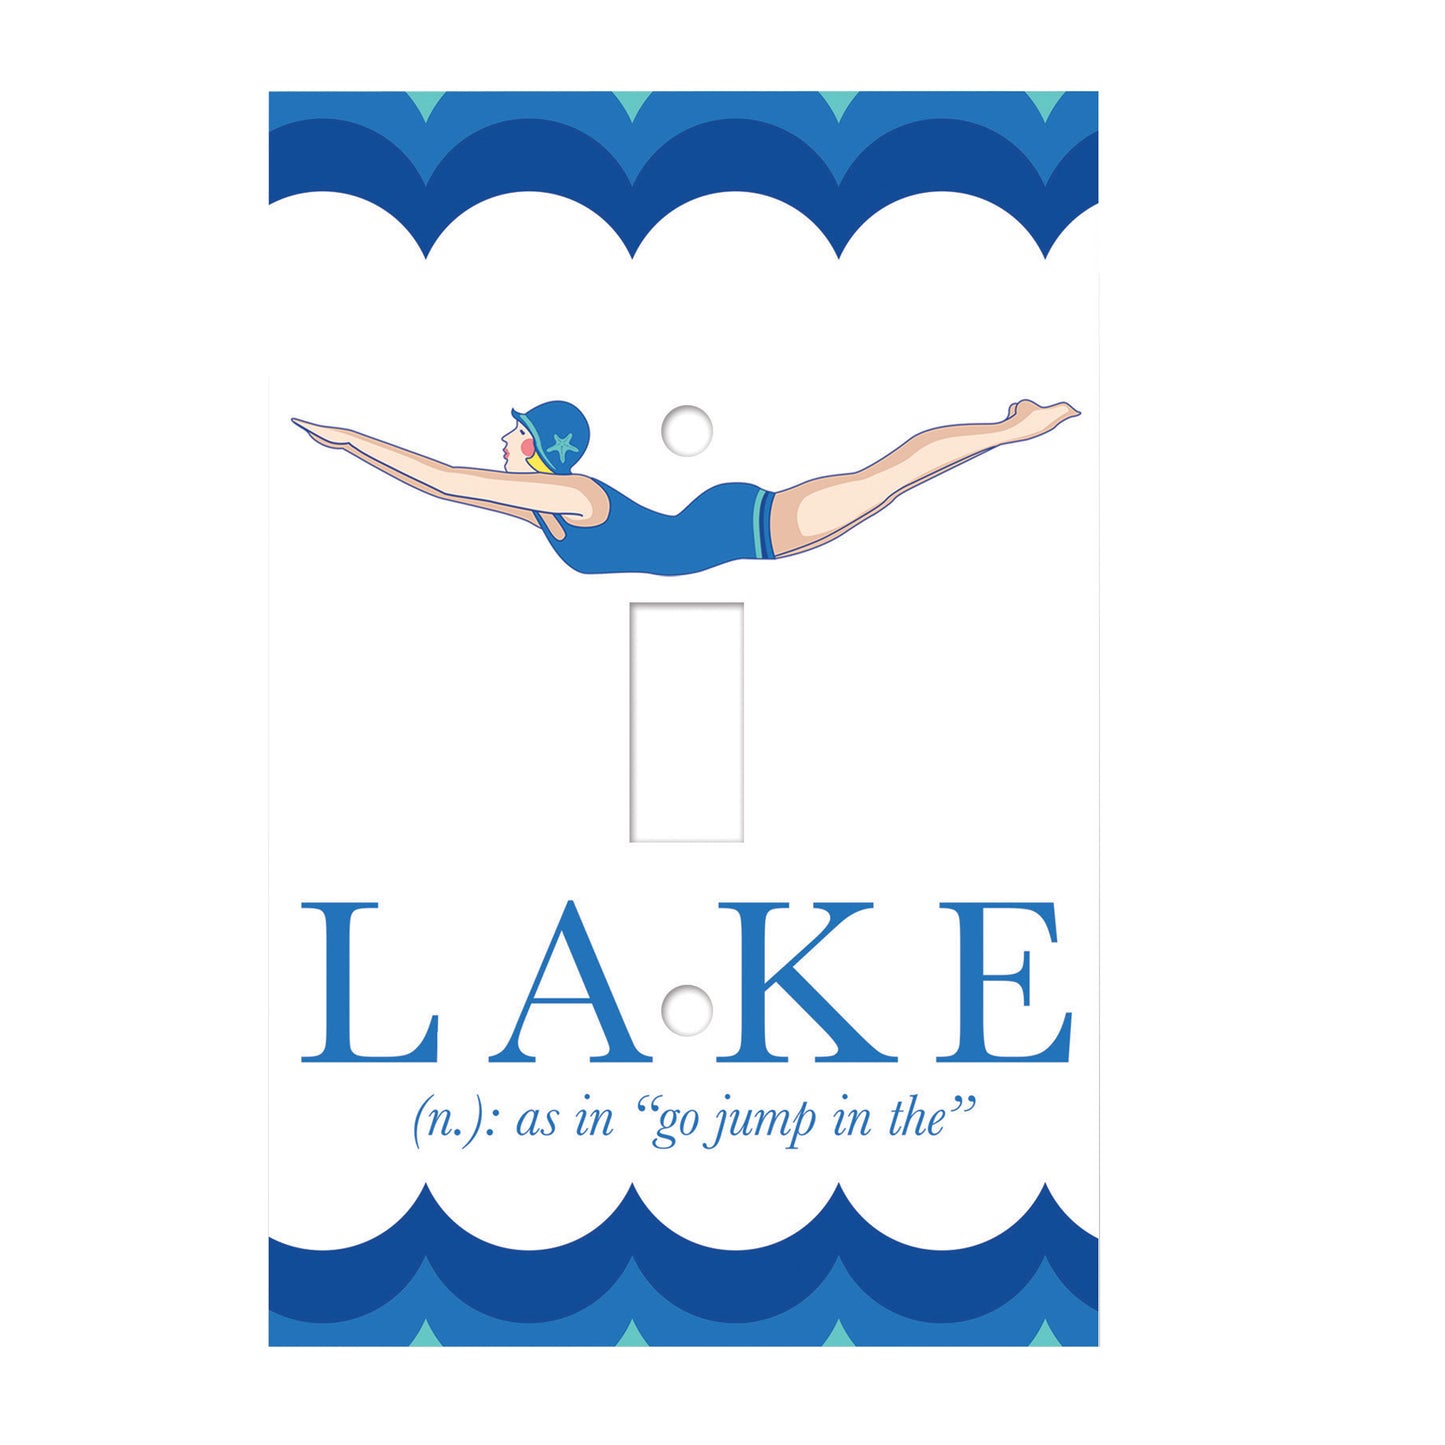 ceramic single toggle switch plate featuring a woman in a bathing suit diving and text reading "Lake (noun), as in 'go jump in the'". the switch plate also features wave embellishments along the edges. 